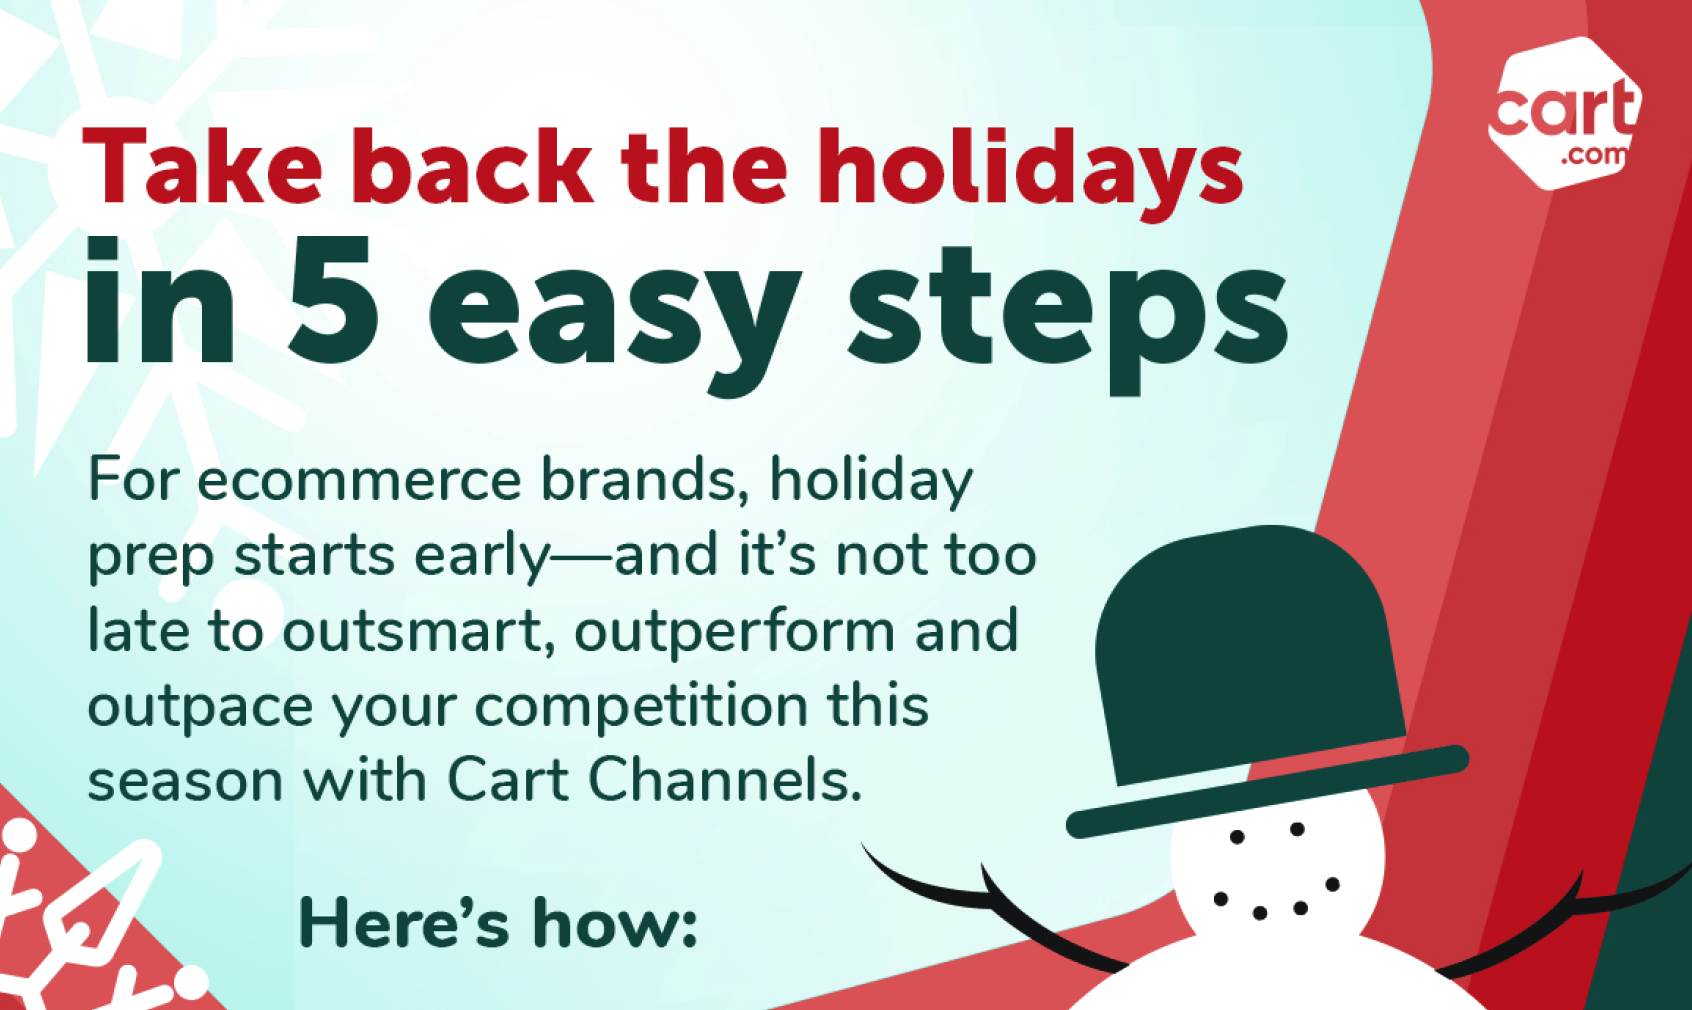 Take back the holidays in 5 easy steps